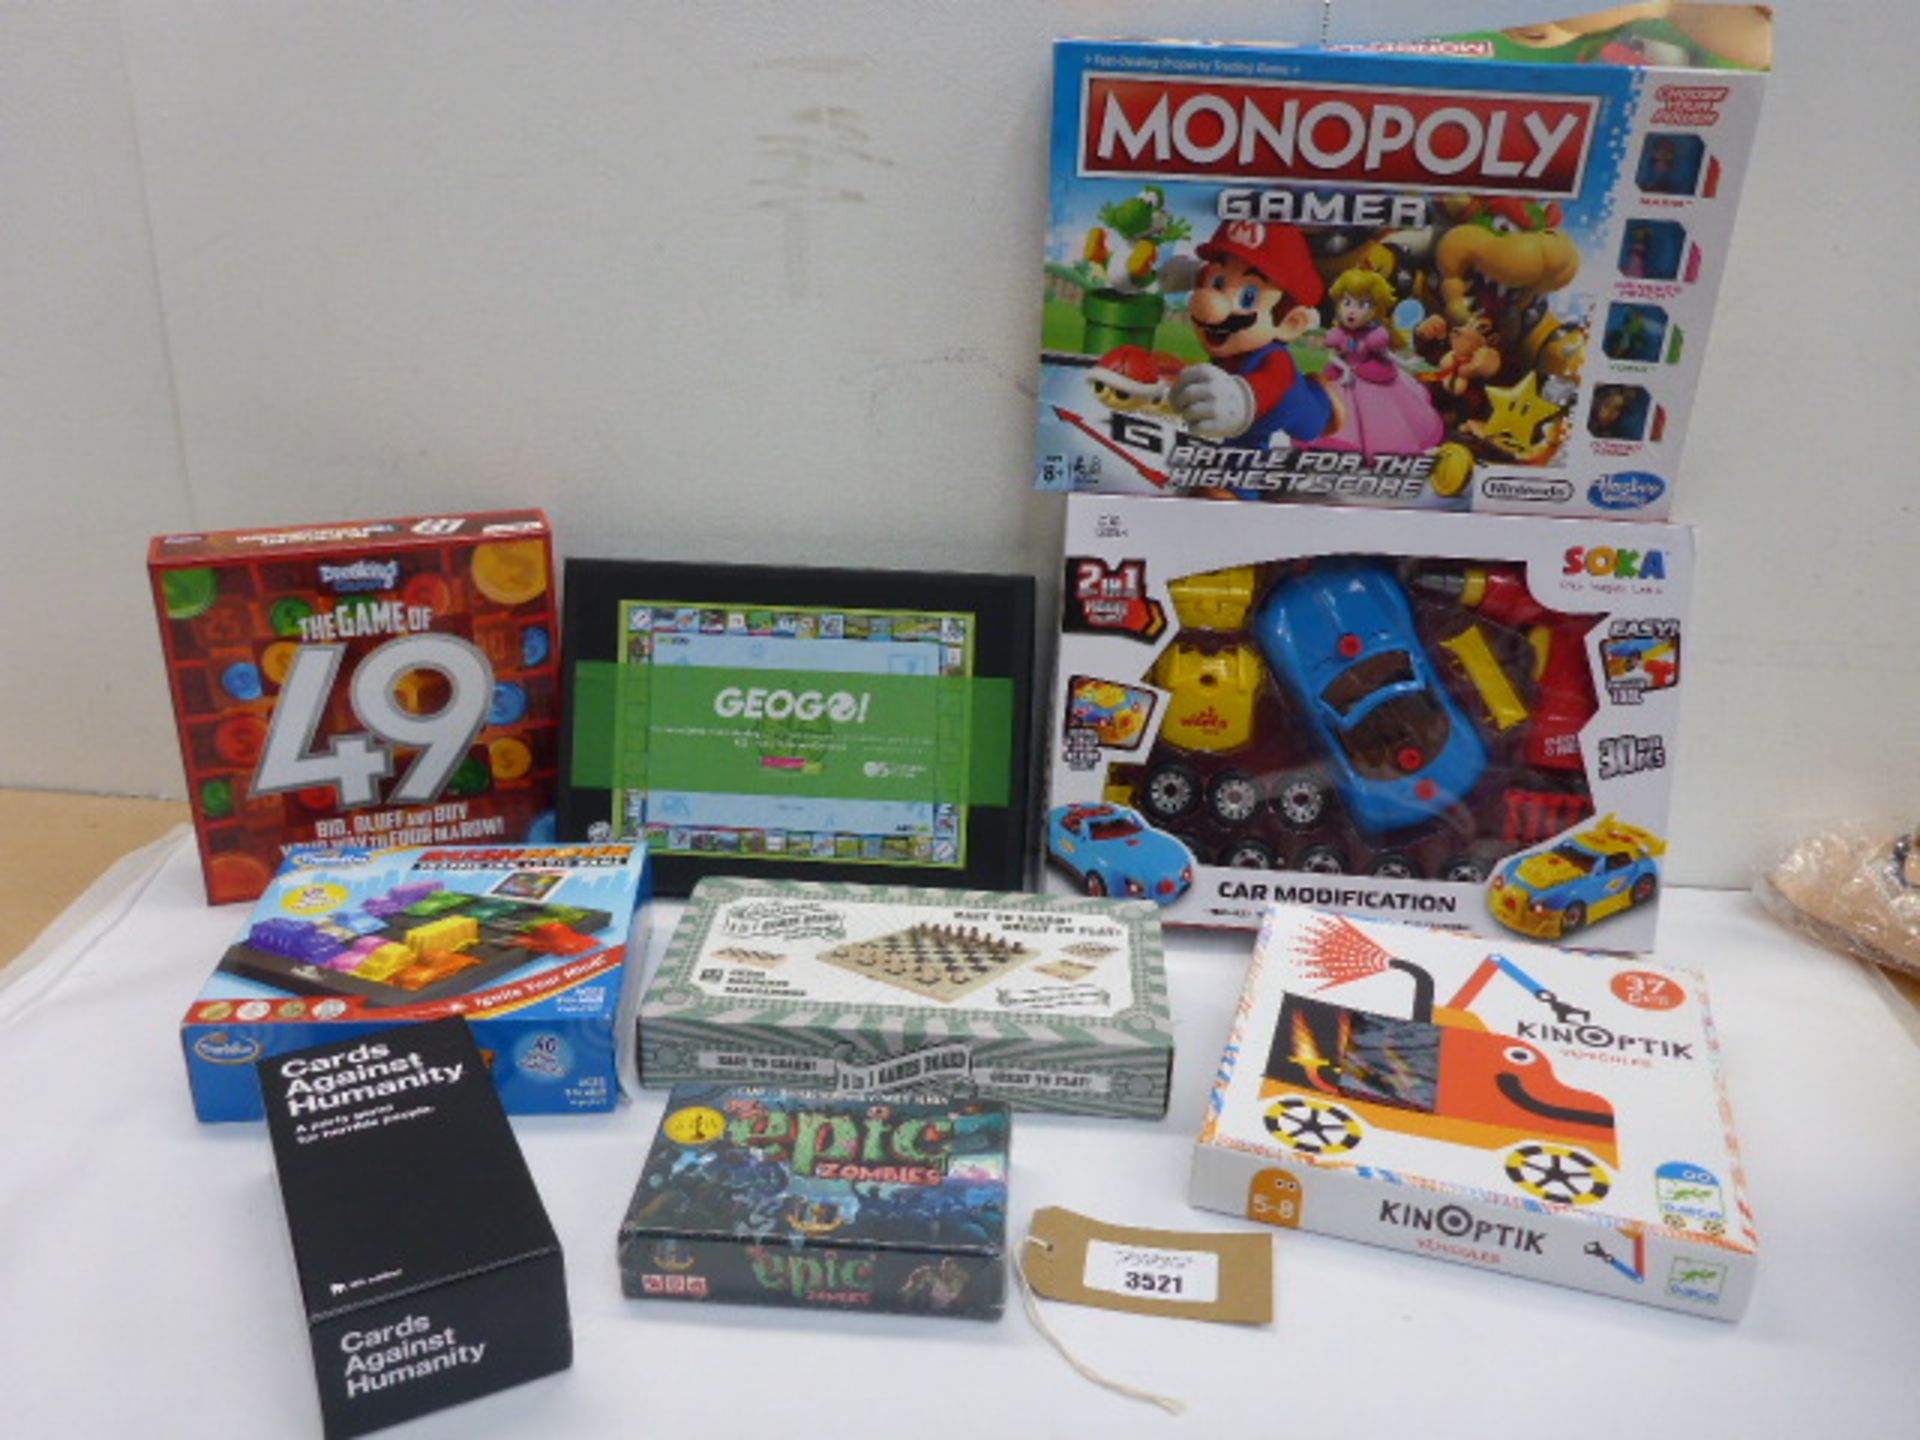 9 boxed games including Ningtendo Monopoly, Cards Against Humanity, Kinoptik, The game of 49, Geogo!